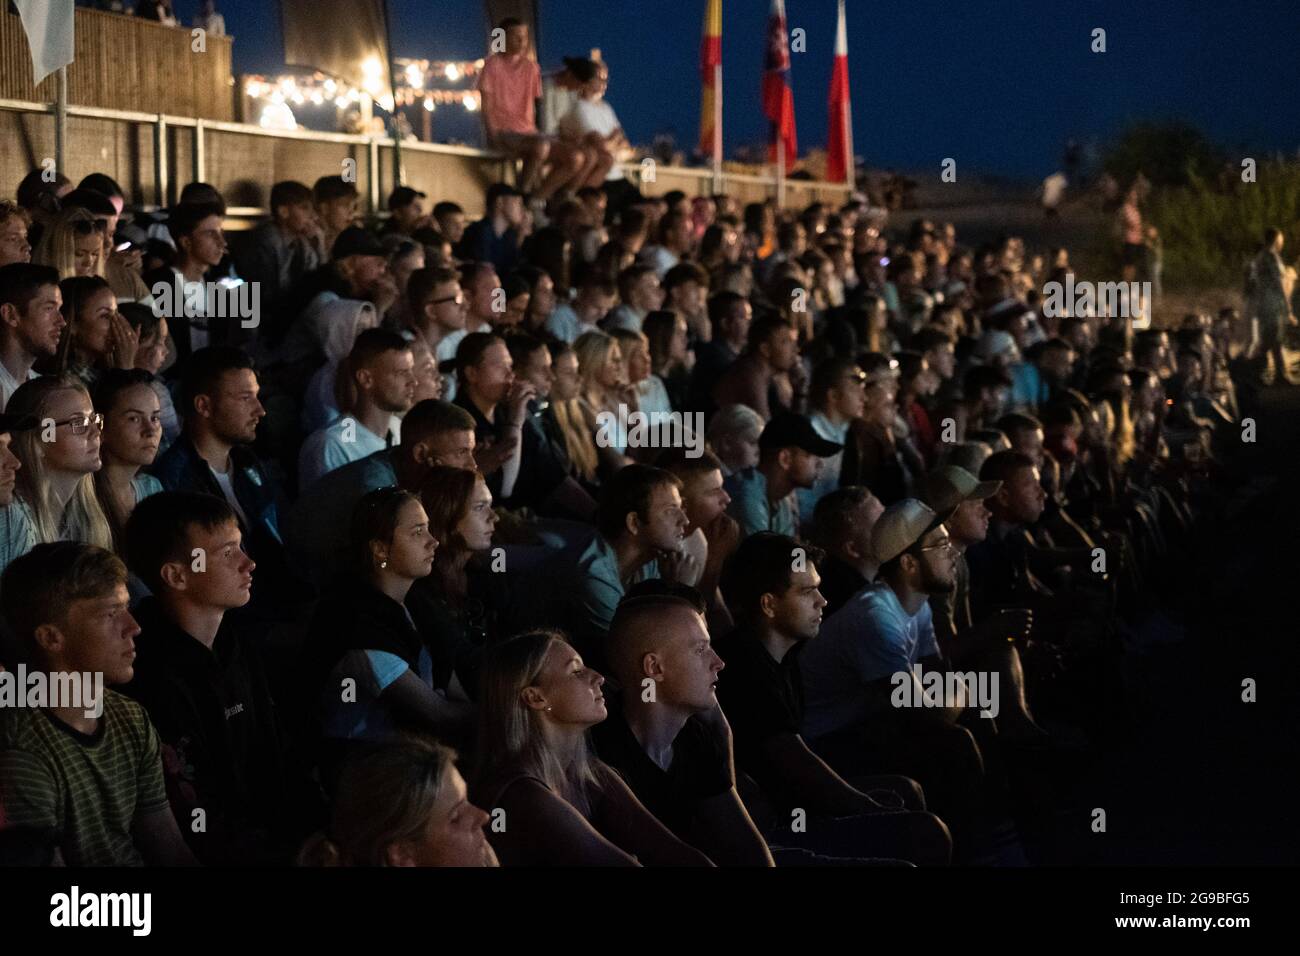 Pärnu, Estonia - July 11, 2021: Large crowd of fans cathered together to watch European Football Championship final between Italy and England on Pärnu Stock Photo